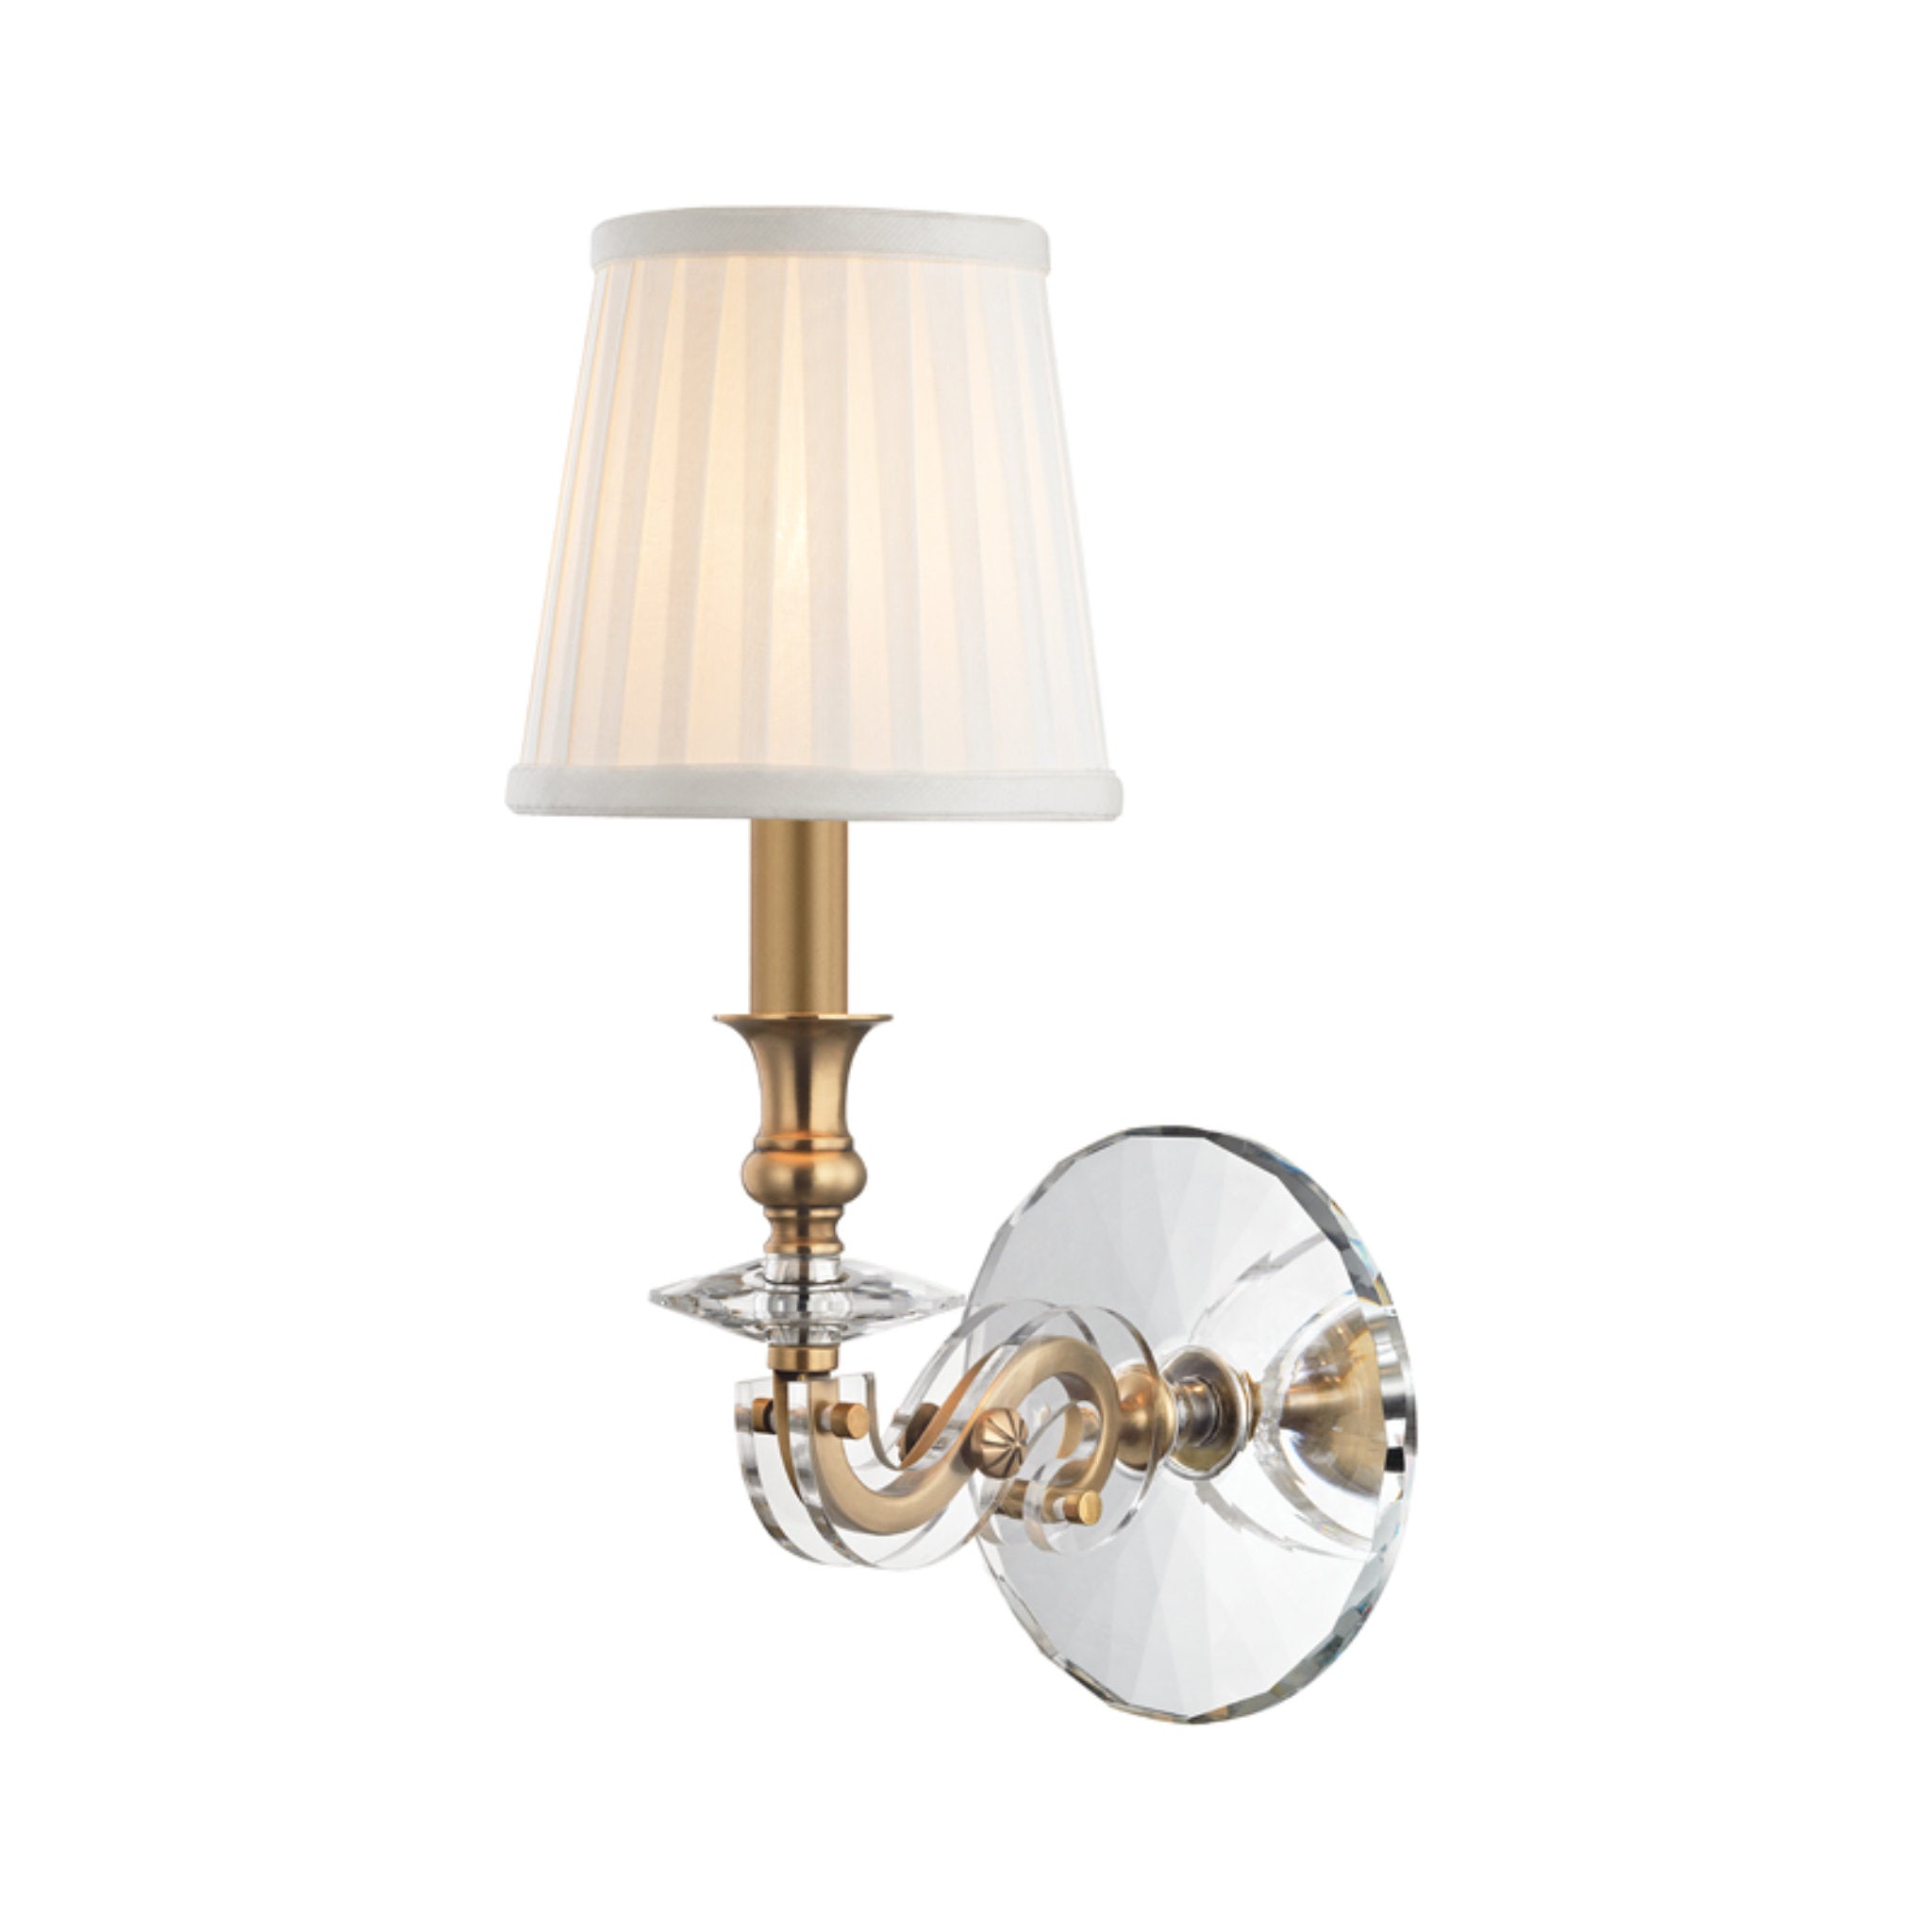 Lapeer 1 Light Wall Sconce in Aged Brass